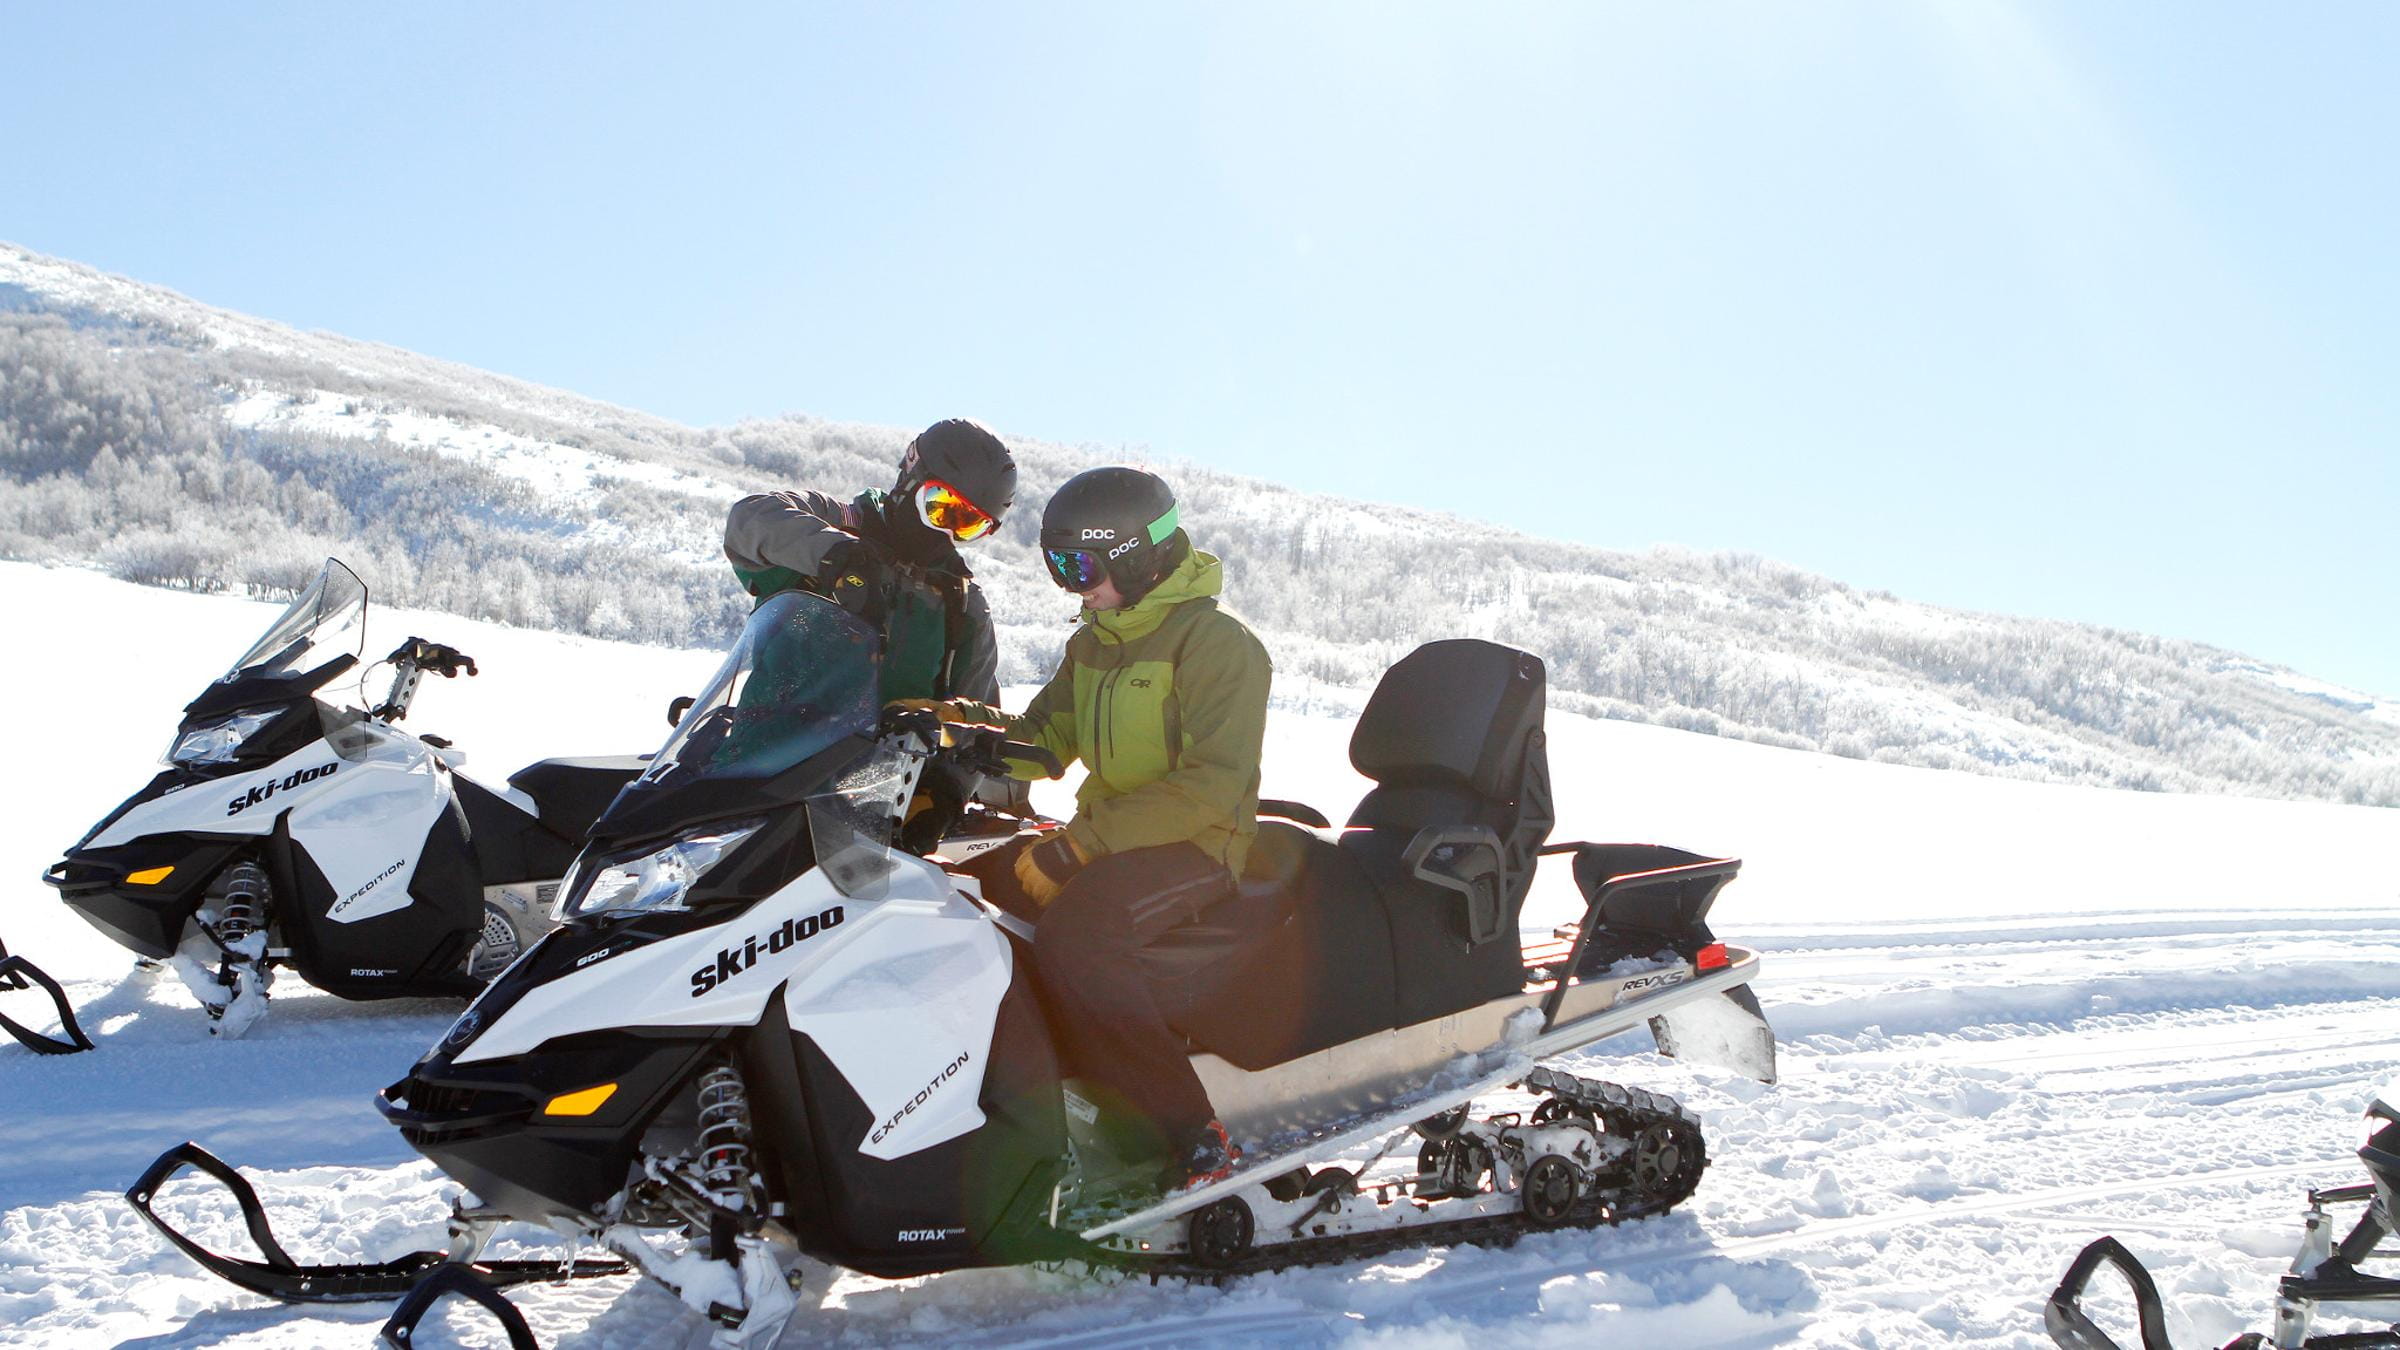 Snowmobile guide showing a guest the snowmobile